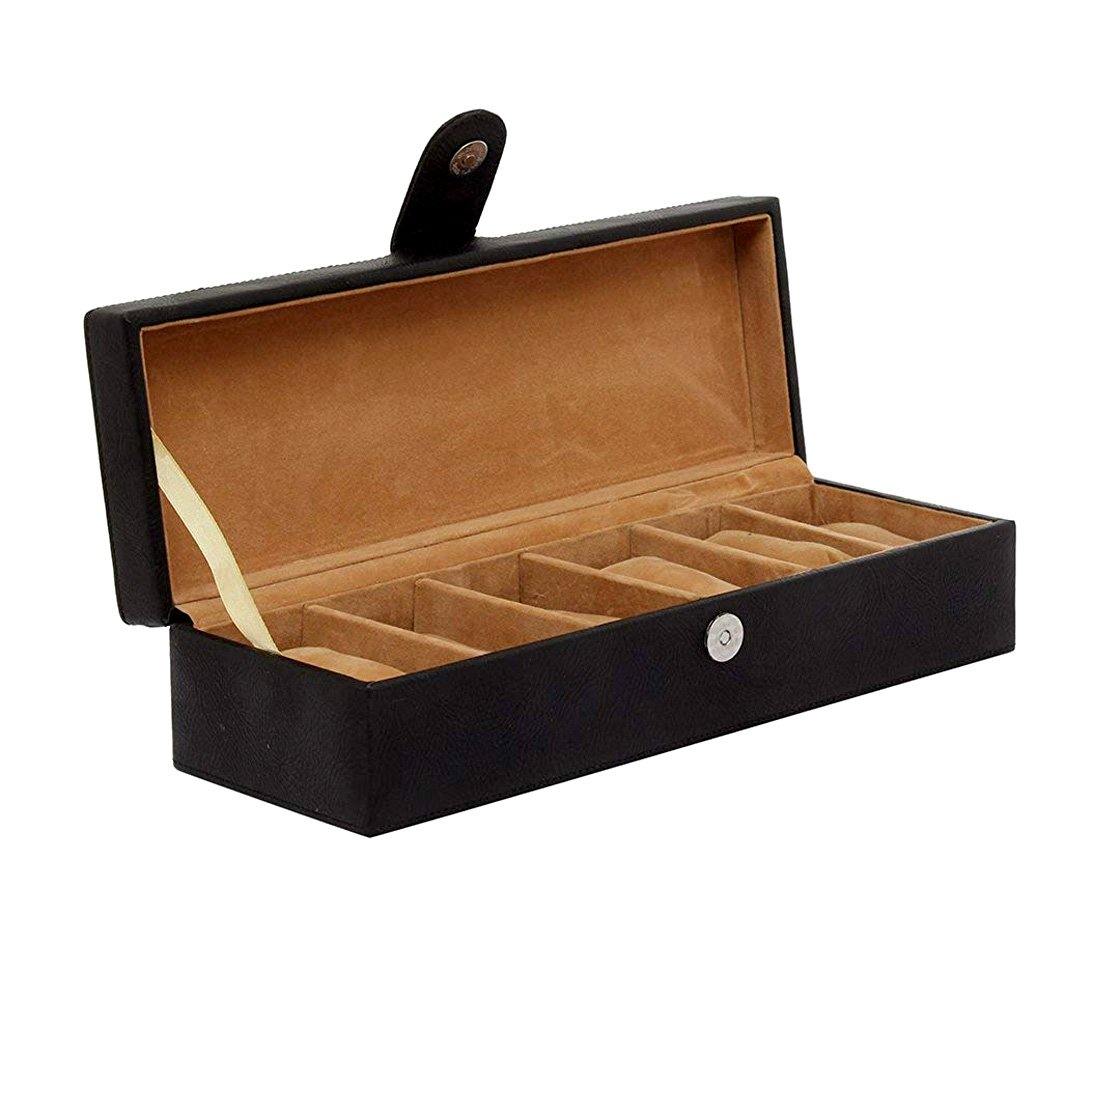 Leather World Unisex 6 Slot Watch Organizer Box For Watch Enthusiasts